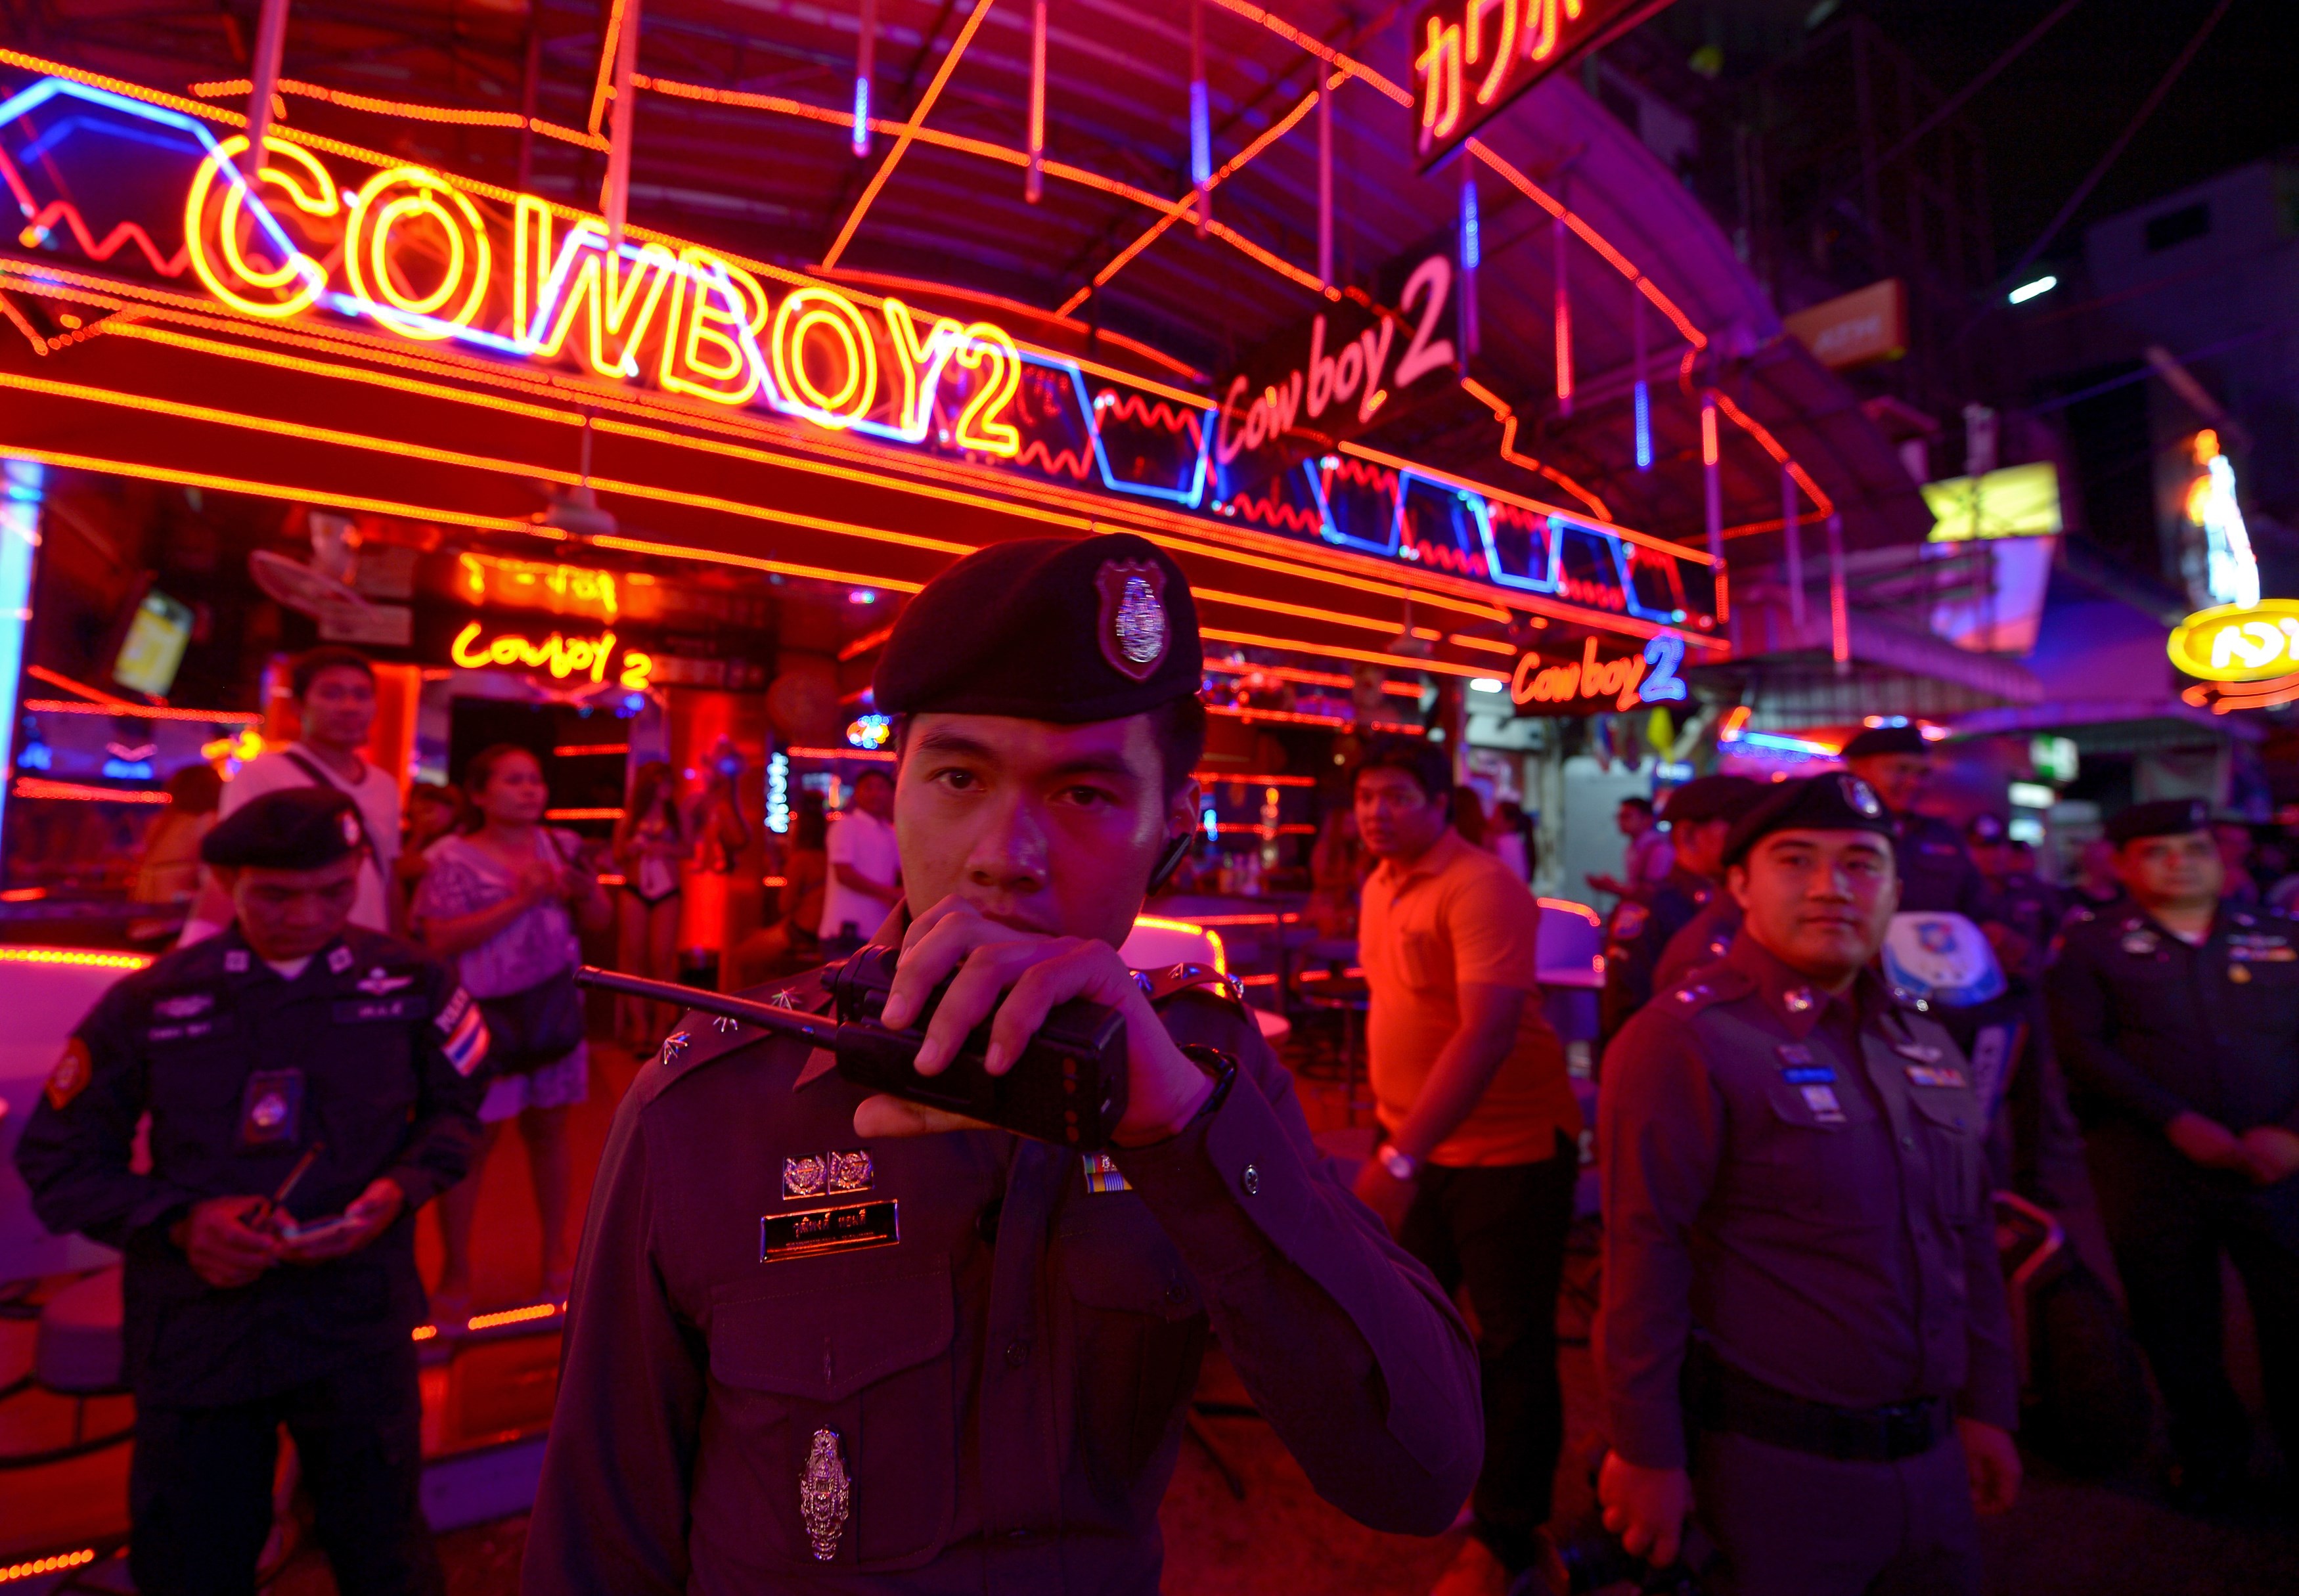 Thai policemen check security at bars in the tourist area of Bangkok on August 19, 2015. (Pornchai Kittiwongsakul—AFP/Getty Images)